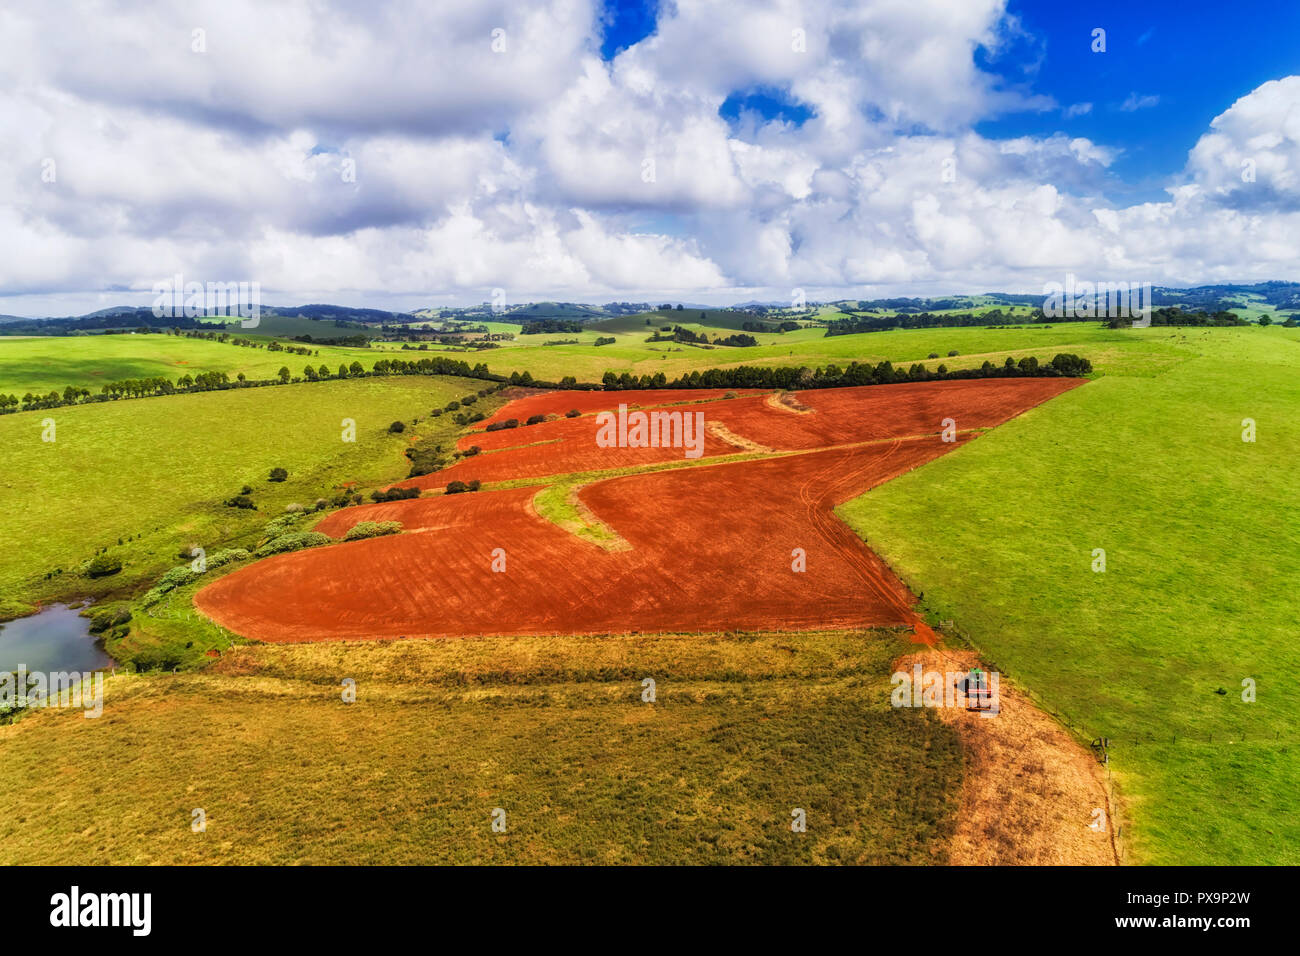 Tractor works in a field on red australian soil on hillside near green cultivated pasture around Dorrigo regional agricultural town in NSW. Stock Photo